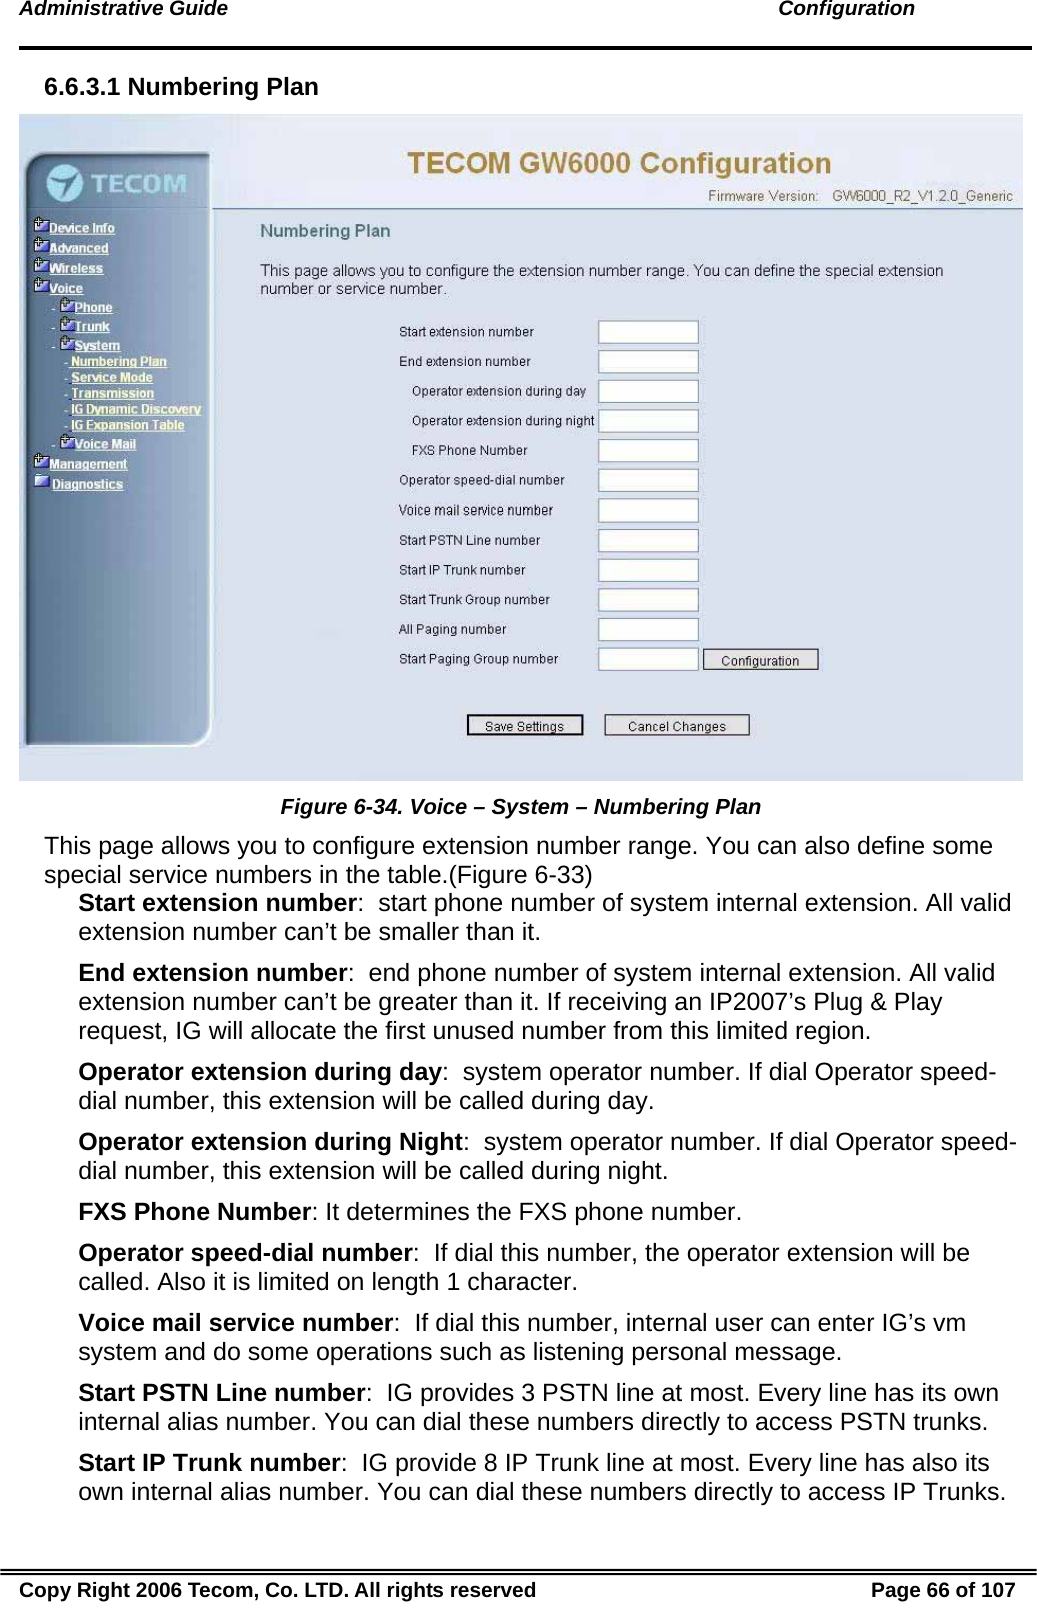 Administrative Guide                                                                                               Configuration 6.6.3.1 Numbering Plan  Figure 6-34. Voice – System – Numbering Plan This page allows you to configure extension number range. You can also define some special service numbers in the table.(Figure 6-33) Start extension number:  start phone number of system internal extension. All valid extension number can’t be smaller than it. End extension number:  end phone number of system internal extension. All valid extension number can’t be greater than it. If receiving an IP2007’s Plug &amp; Play request, IG will allocate the first unused number from this limited region.  Operator extension during day:  system operator number. If dial Operator speed-dial number, this extension will be called during day. Operator extension during Night:  system operator number. If dial Operator speed-dial number, this extension will be called during night. FXS Phone Number: It determines the FXS phone number. Operator speed-dial number:  If dial this number, the operator extension will be called. Also it is limited on length 1 character. Voice mail service number:  If dial this number, internal user can enter IG’s vm system and do some operations such as listening personal message. Start PSTN Line number:  IG provides 3 PSTN line at most. Every line has its own internal alias number. You can dial these numbers directly to access PSTN trunks. Start IP Trunk number:  IG provide 8 IP Trunk line at most. Every line has also its own internal alias number. You can dial these numbers directly to access IP Trunks. Copy Right 2006 Tecom, Co. LTD. All rights reserved  Page 66 of 107 